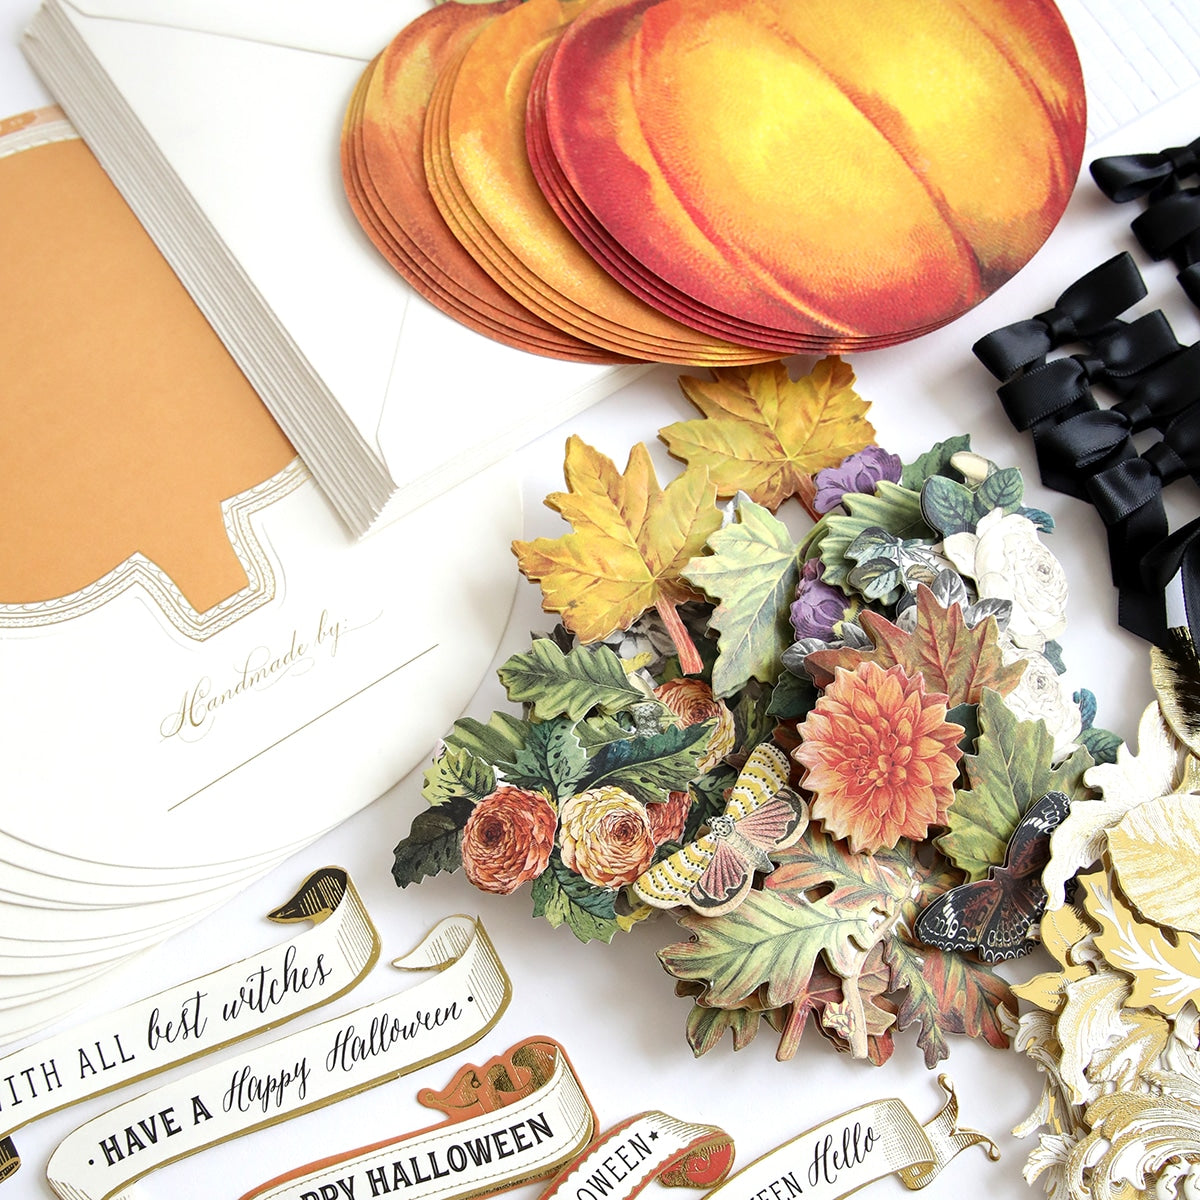 A collection of Simply Rocking Pumpkin Card Making Kit and embellishments for a Halloween party.